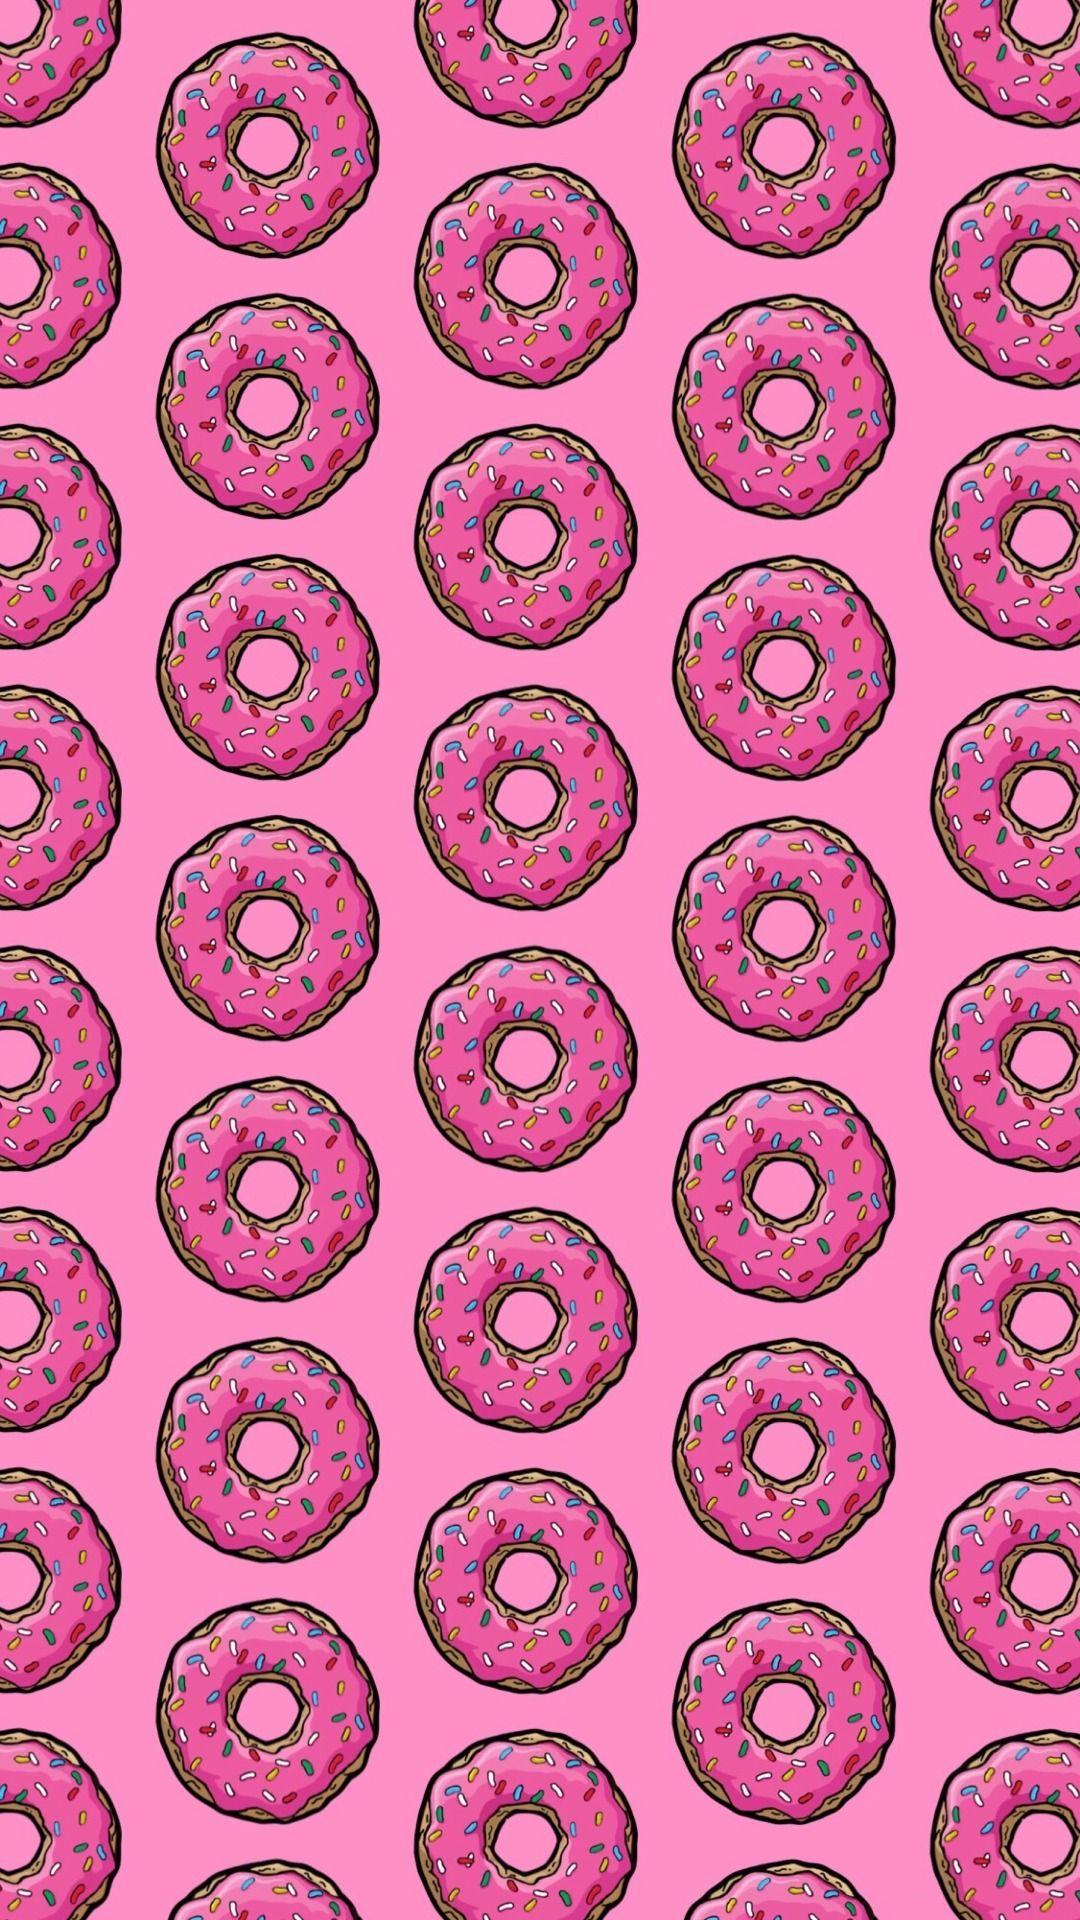 1080 x 1920 · jpeg - Simpsons Donut iPhone Wallpapers - Top Free Simpsons Donut iPhone ...